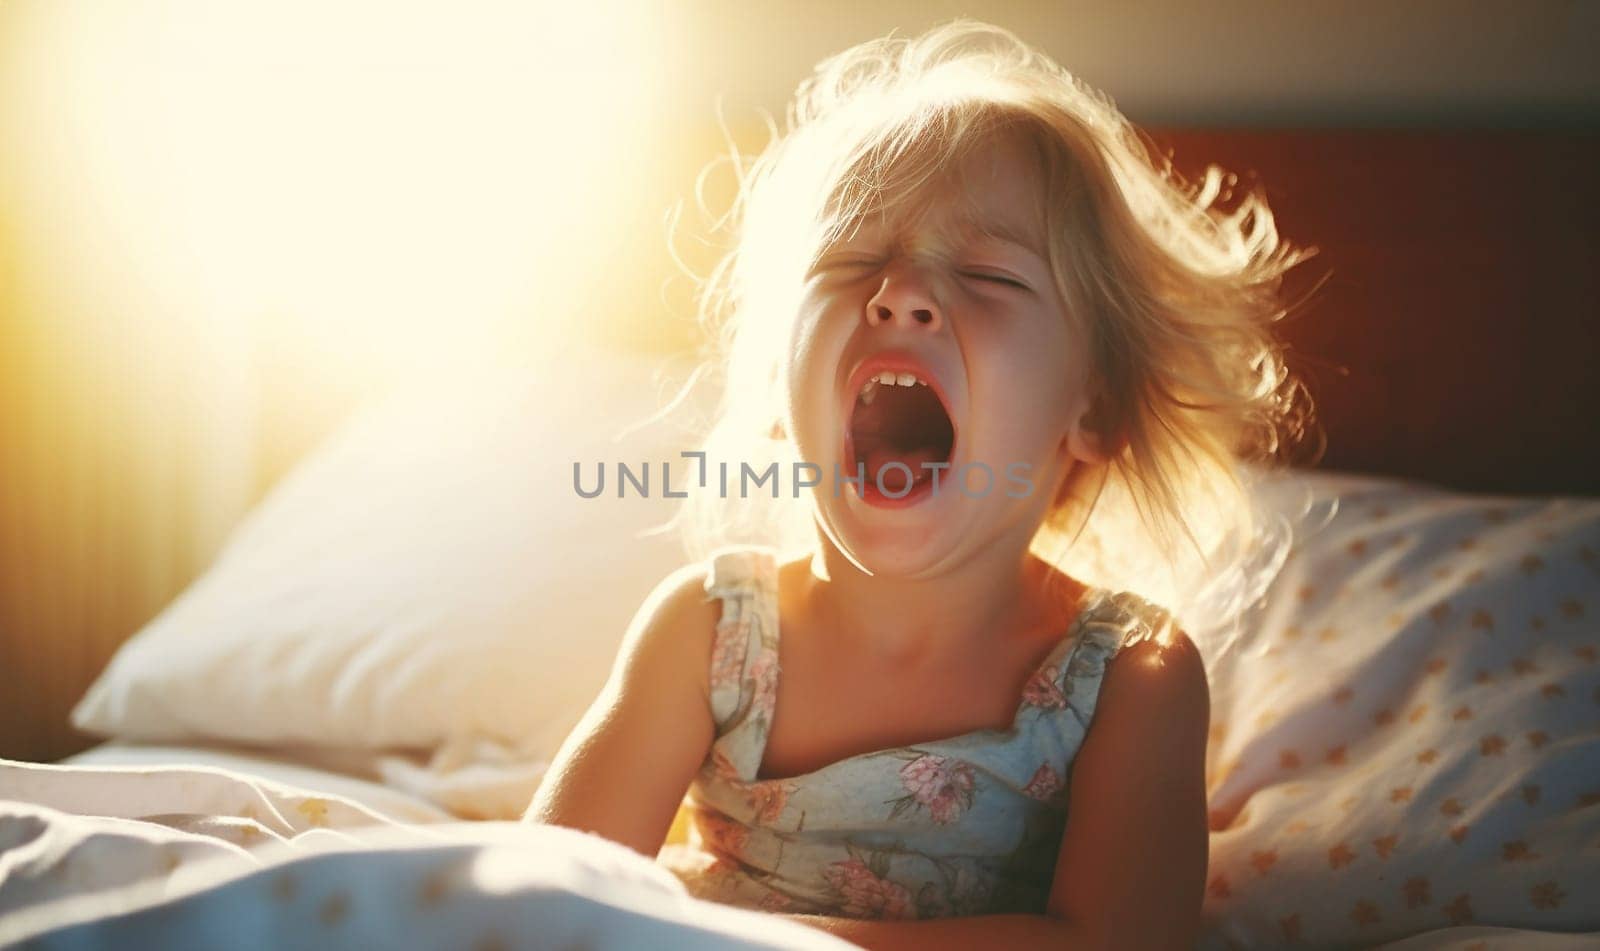 Child cries in bed before bed time, Closeup young girl hurt in pain crying in white bed copy space. Lonely depress stress angry unhappy kid terrible two concept copy space by Annebel146